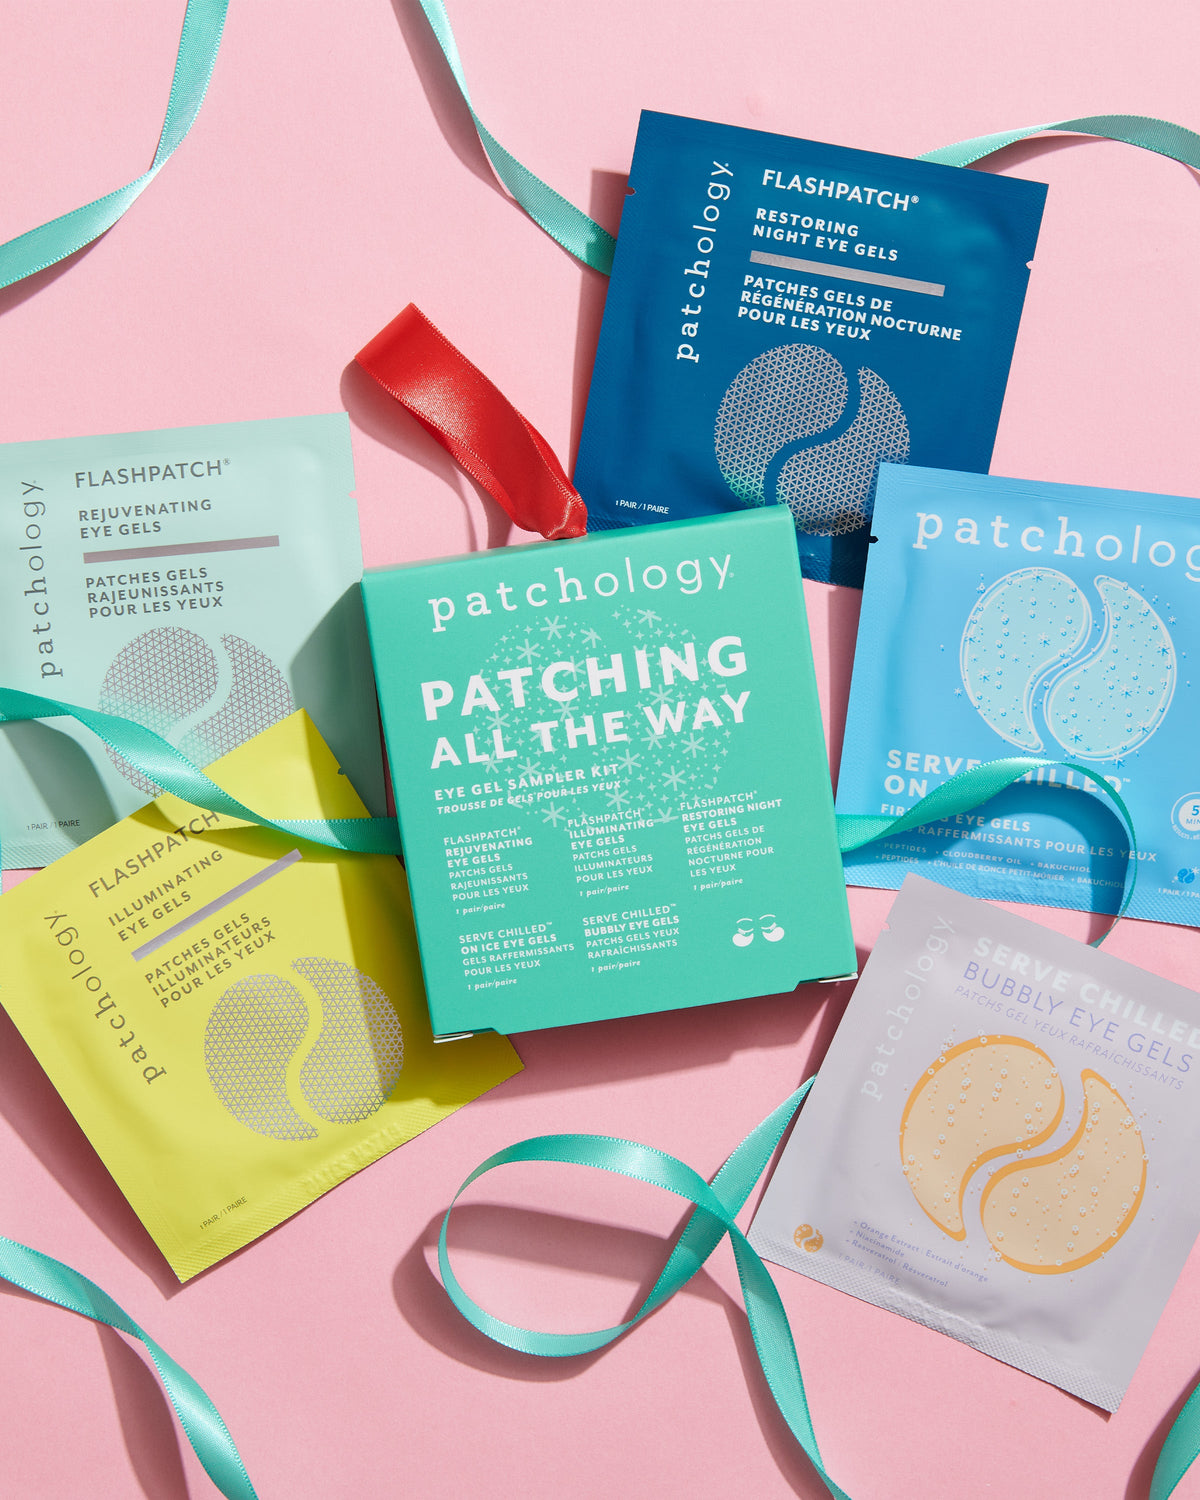 5 products and the packaging laying on a pink background